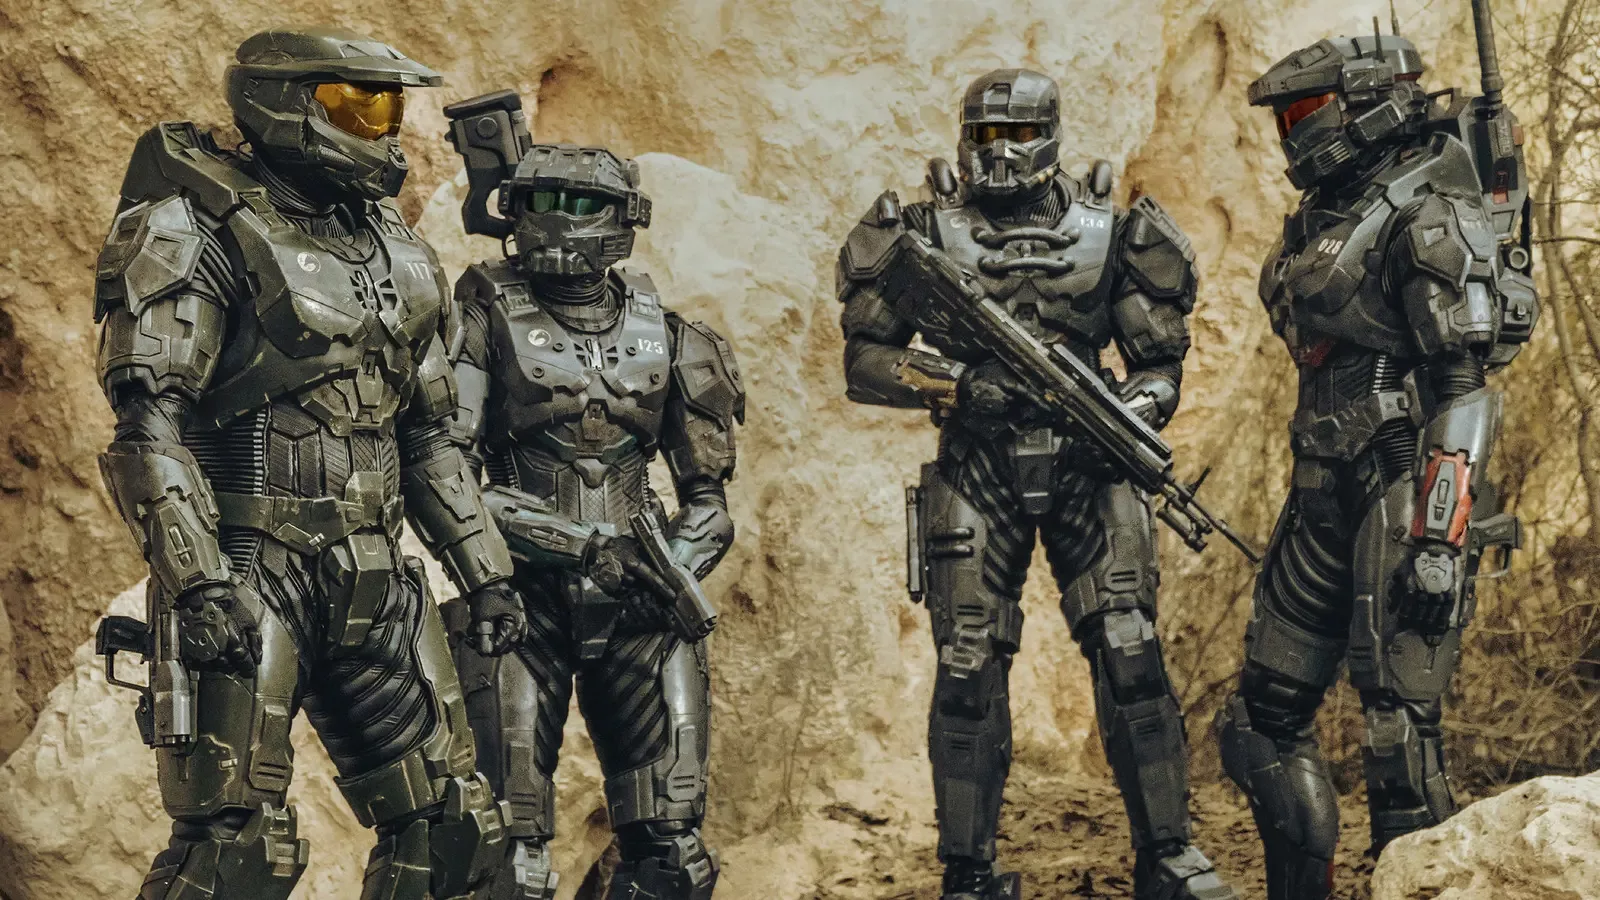 Halo TV Series Episode 3: Emergence Review - On Tap Sports Net